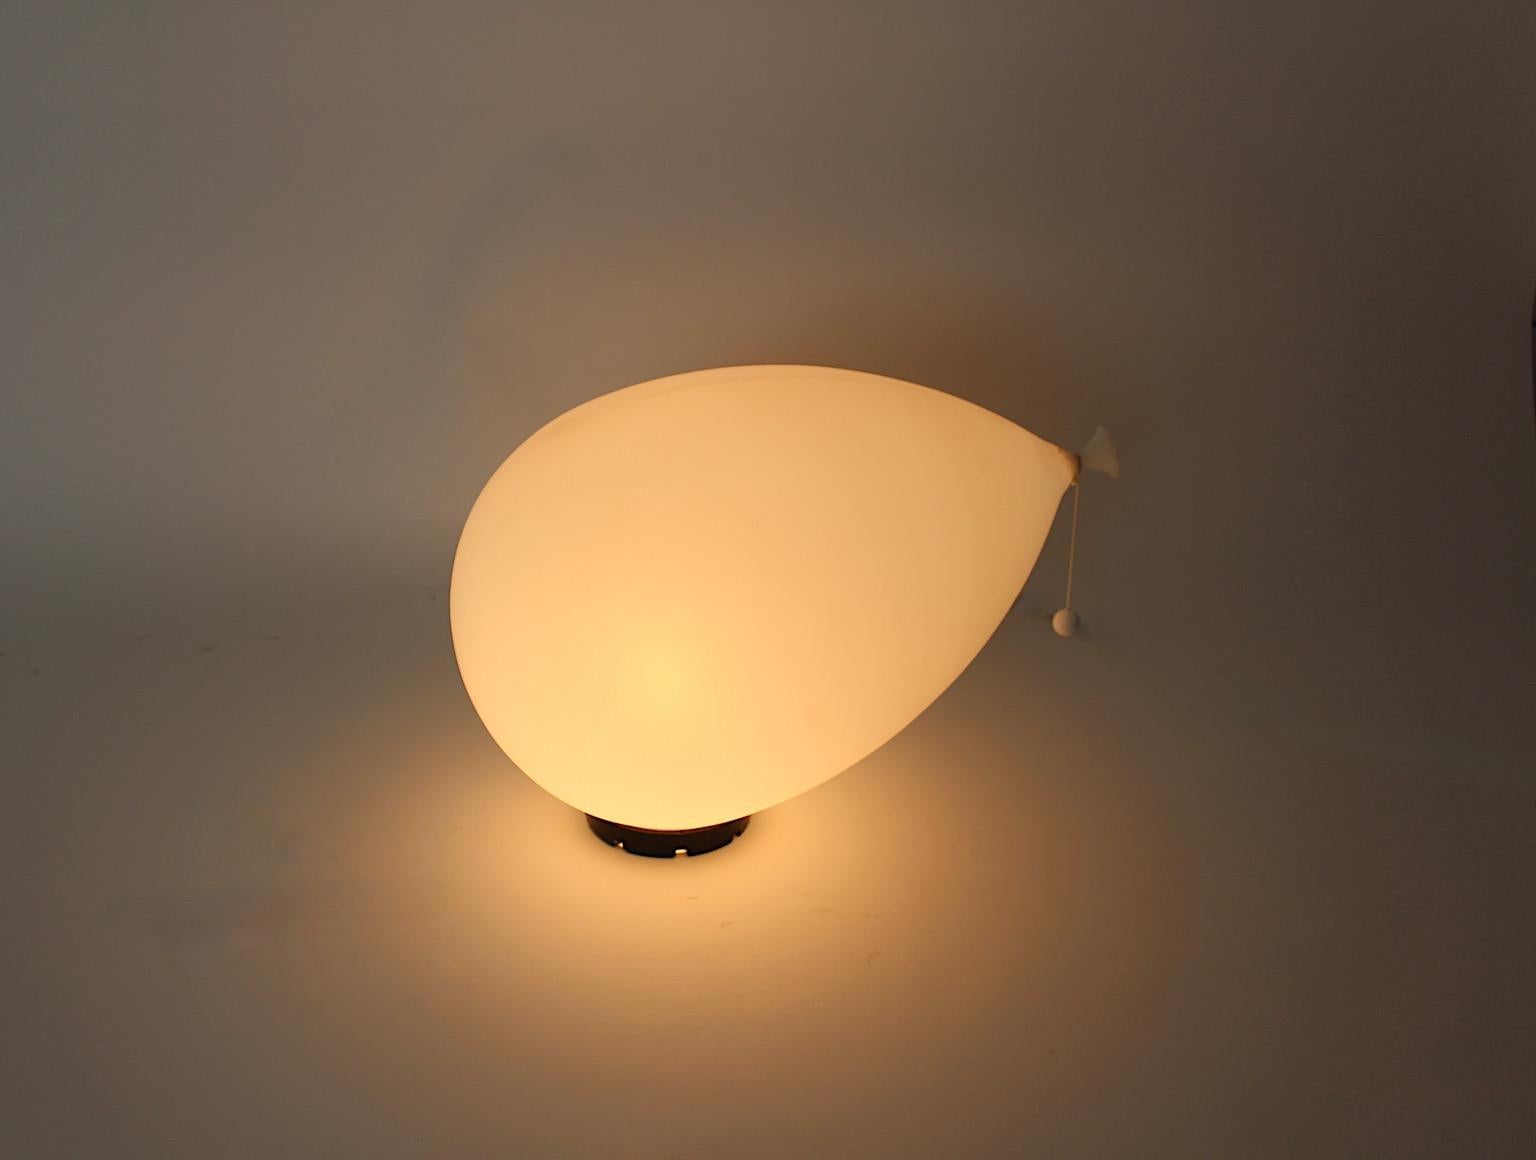 Modern vintage large white balloon flush mount sconce or table lamp by Yves Christin for Bilumen 1980s Italy.
An amazing lighting by Yves Christin for Bilumen 1980s Italy balloon like in white color with black mounting base stamped with company's